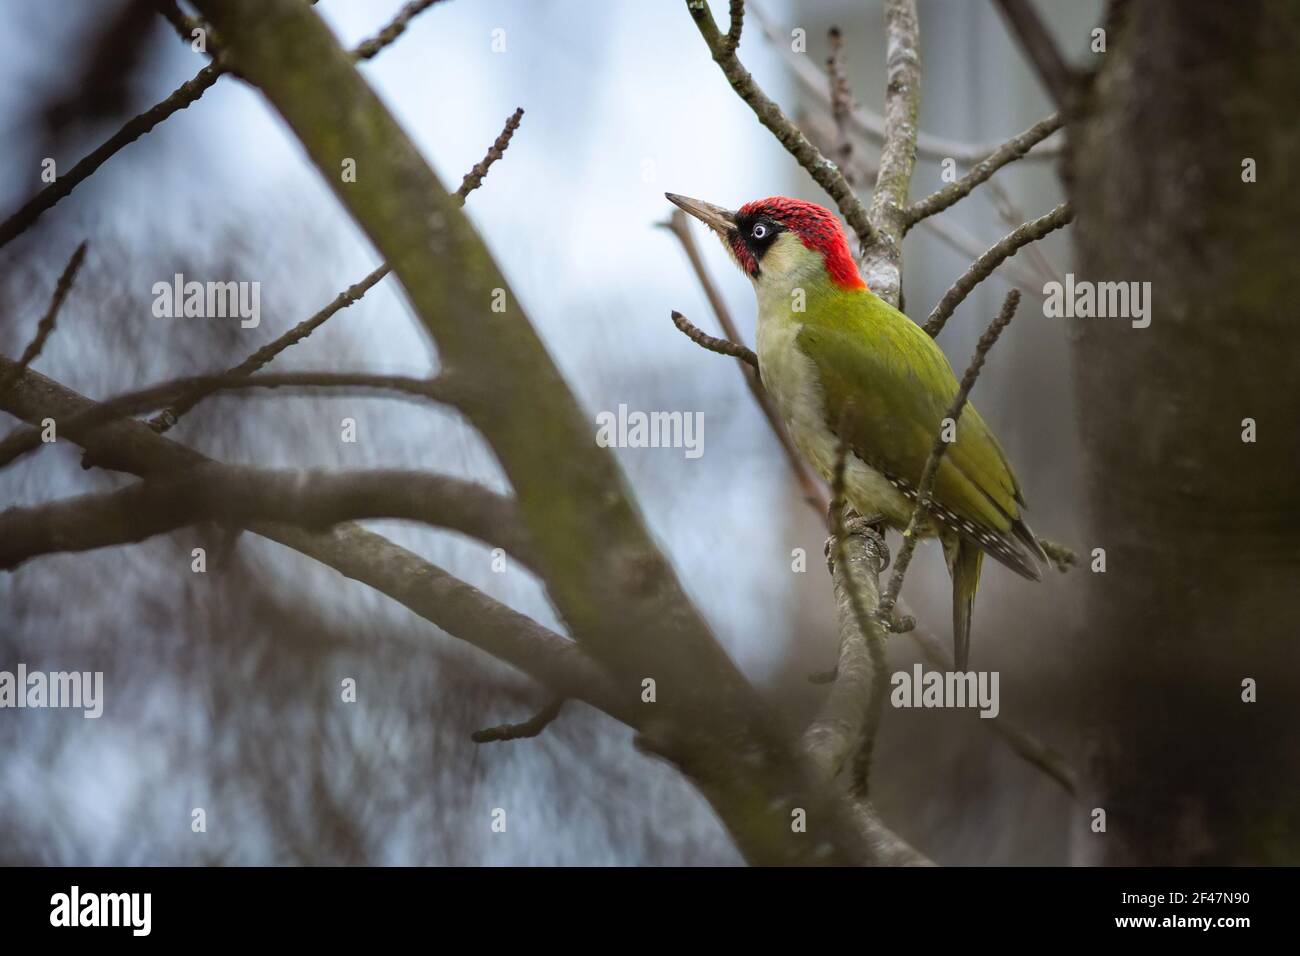 The European green woodpecker with red head perching on a tree in the park. Blue sky in the background. Stock Photo